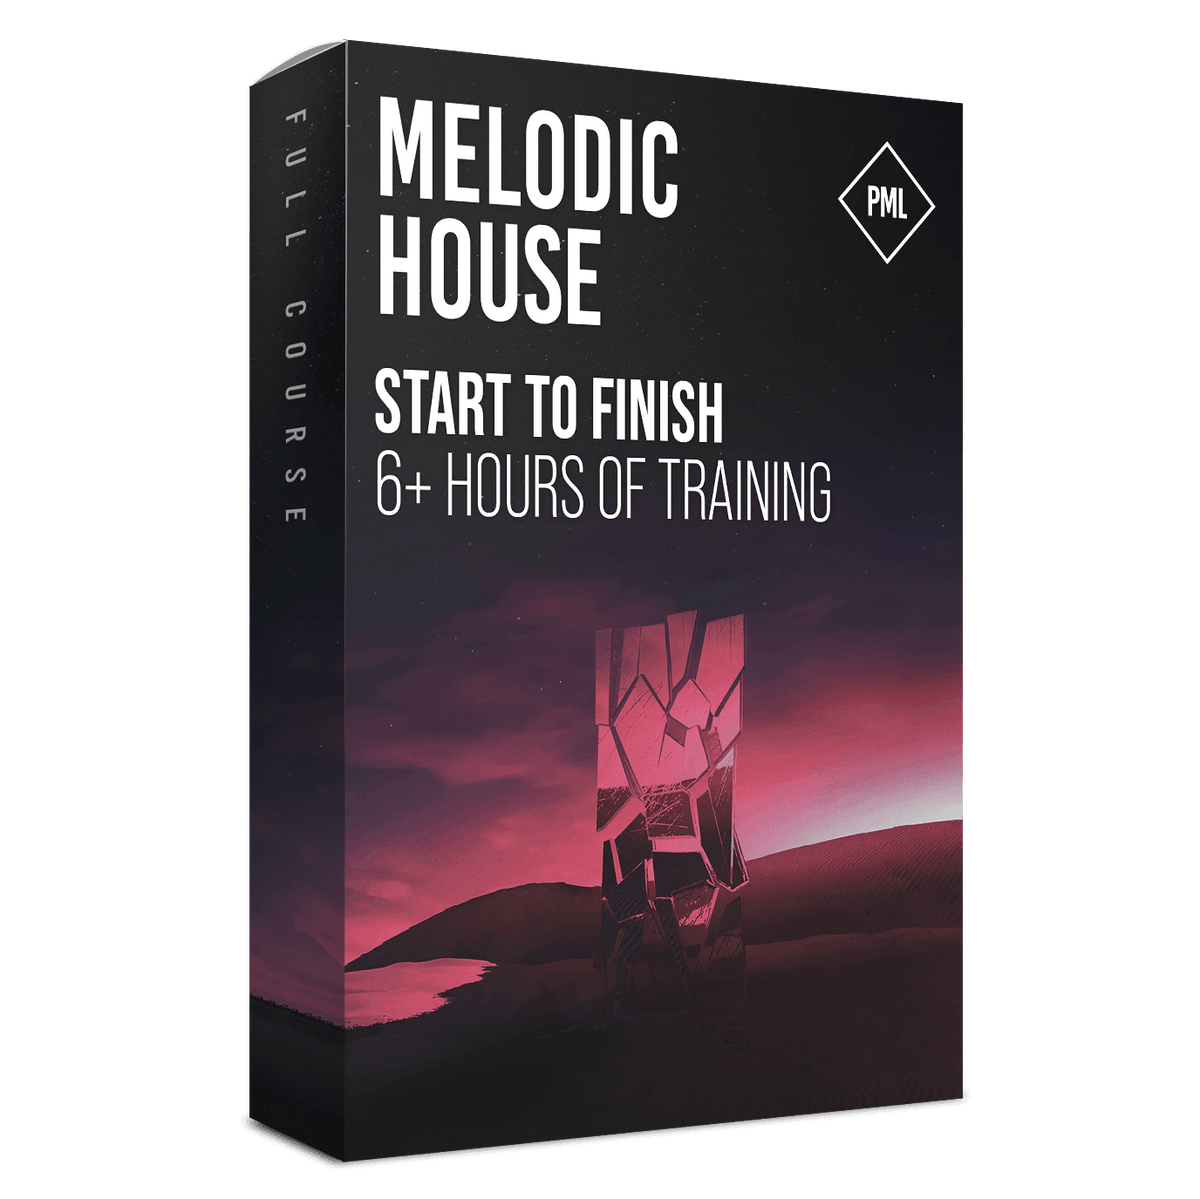 Course: Melodic House Track from Start To Finish (Ben Böhmer Style) Product Box